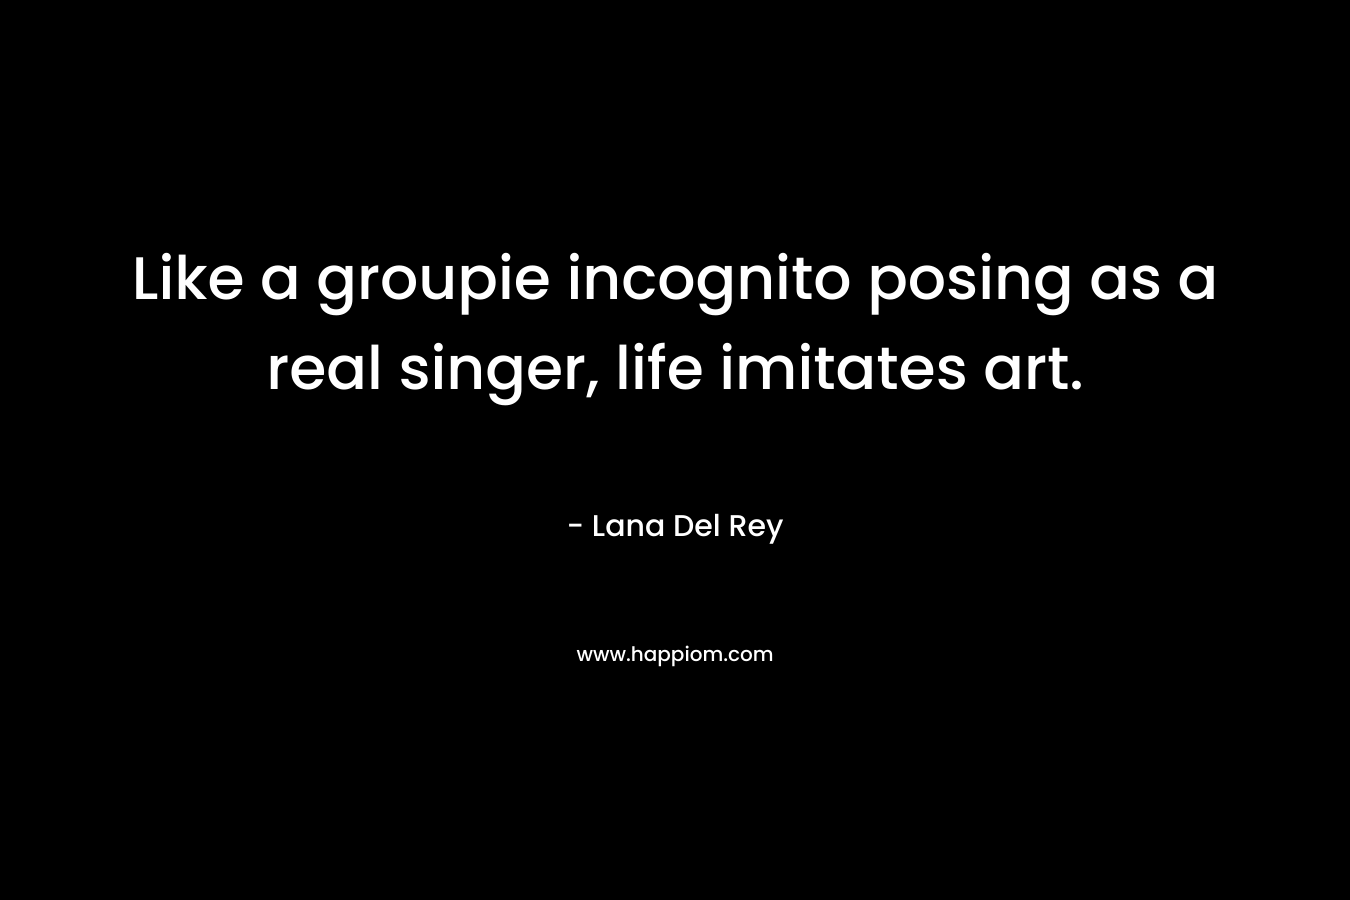 Like a groupie incognito posing as a real singer, life imitates art. – Lana Del Rey